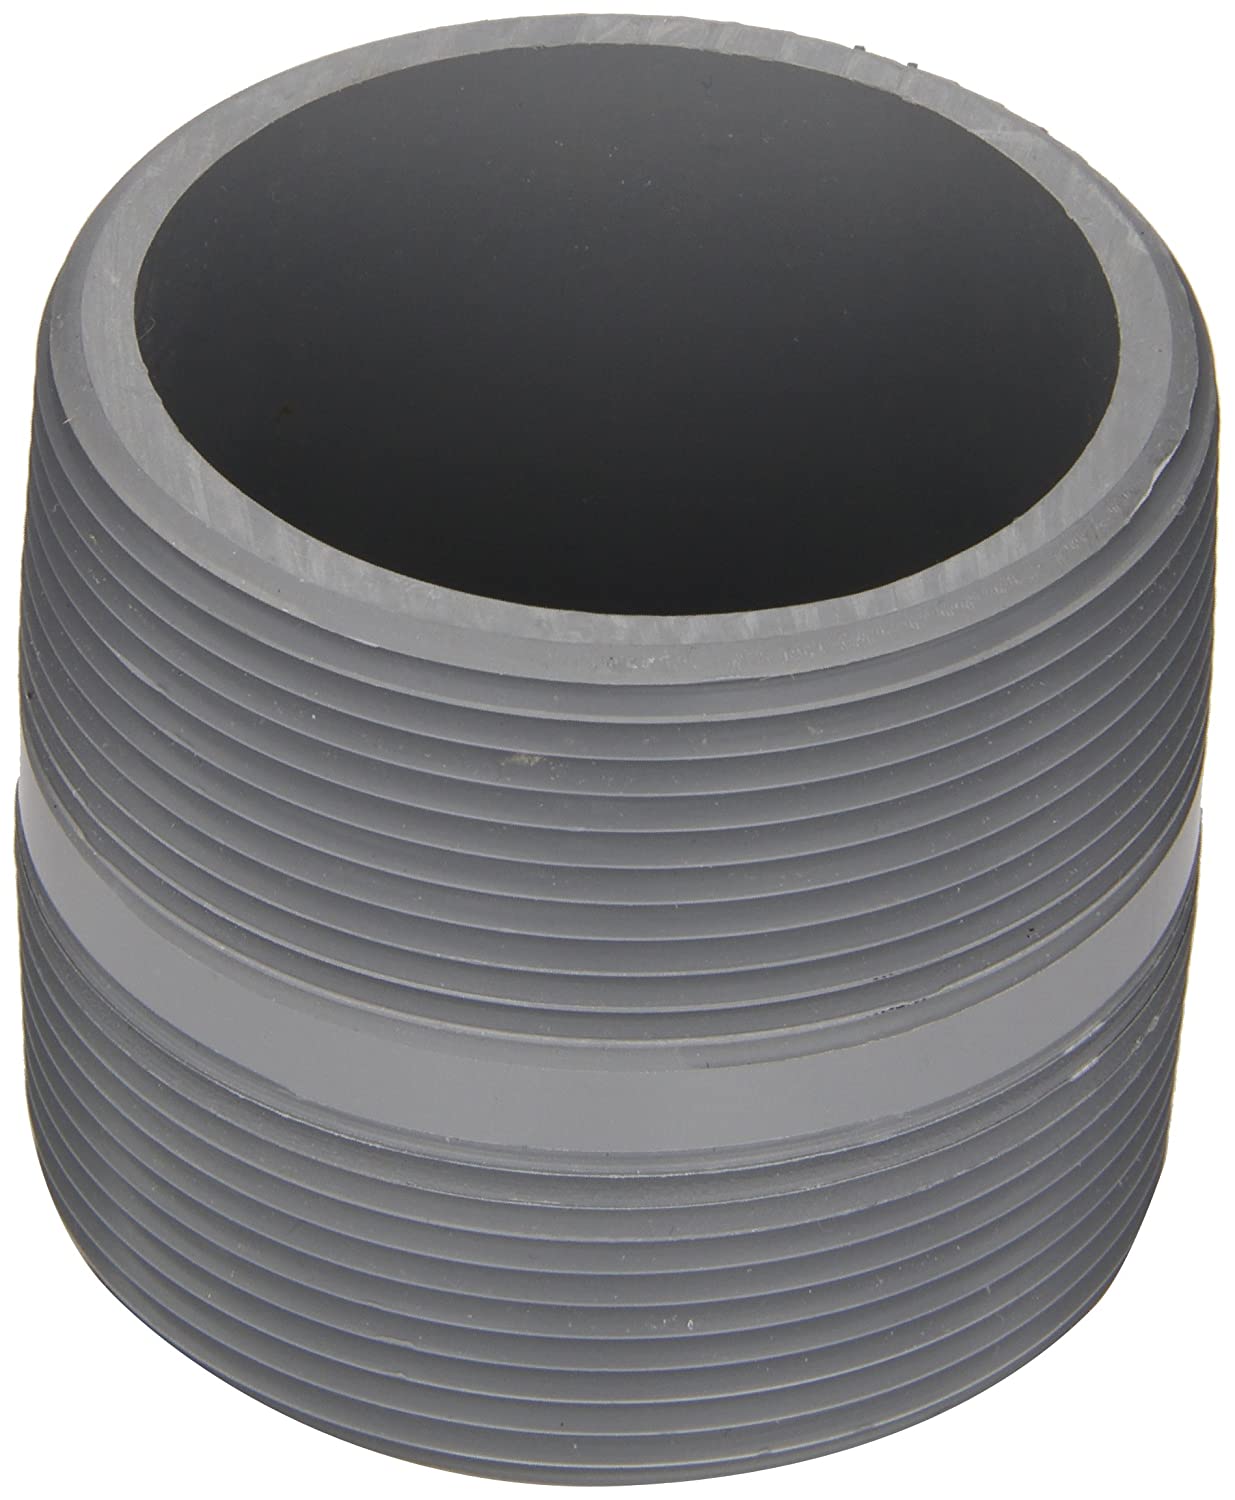 Spears 887-005C - CPVC Pipe Fitting, Close Nipple, Schedule 80, Gray, 2" NPT Male, 2" Length